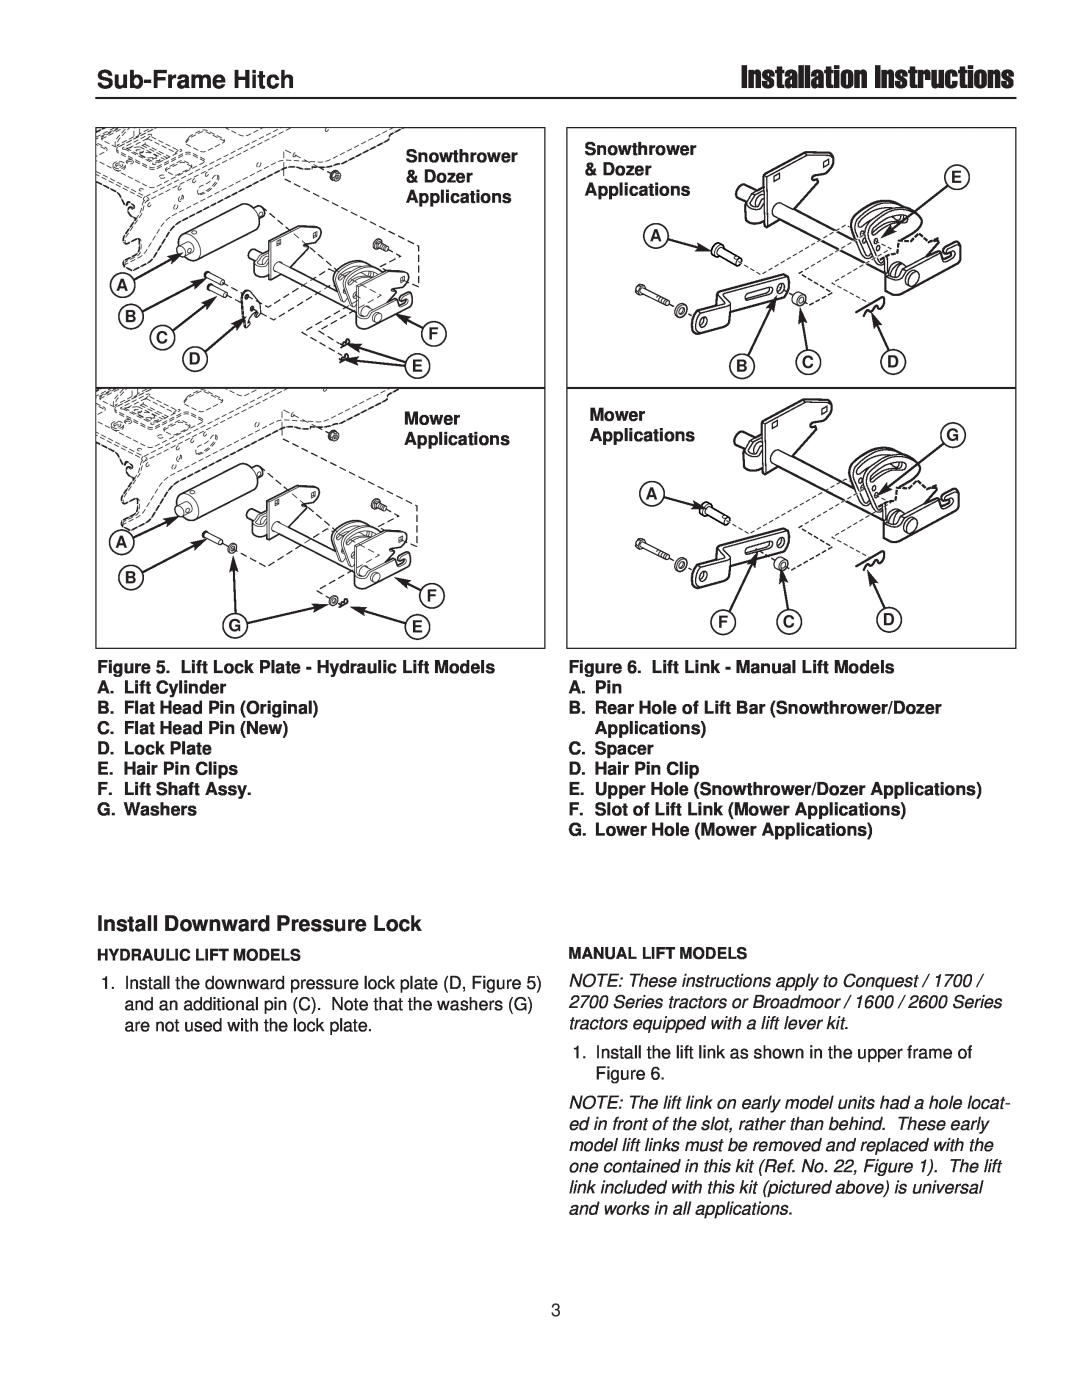 Snapper 1695195 installation instructions Installation Instructions, Sub-Frame Hitch 